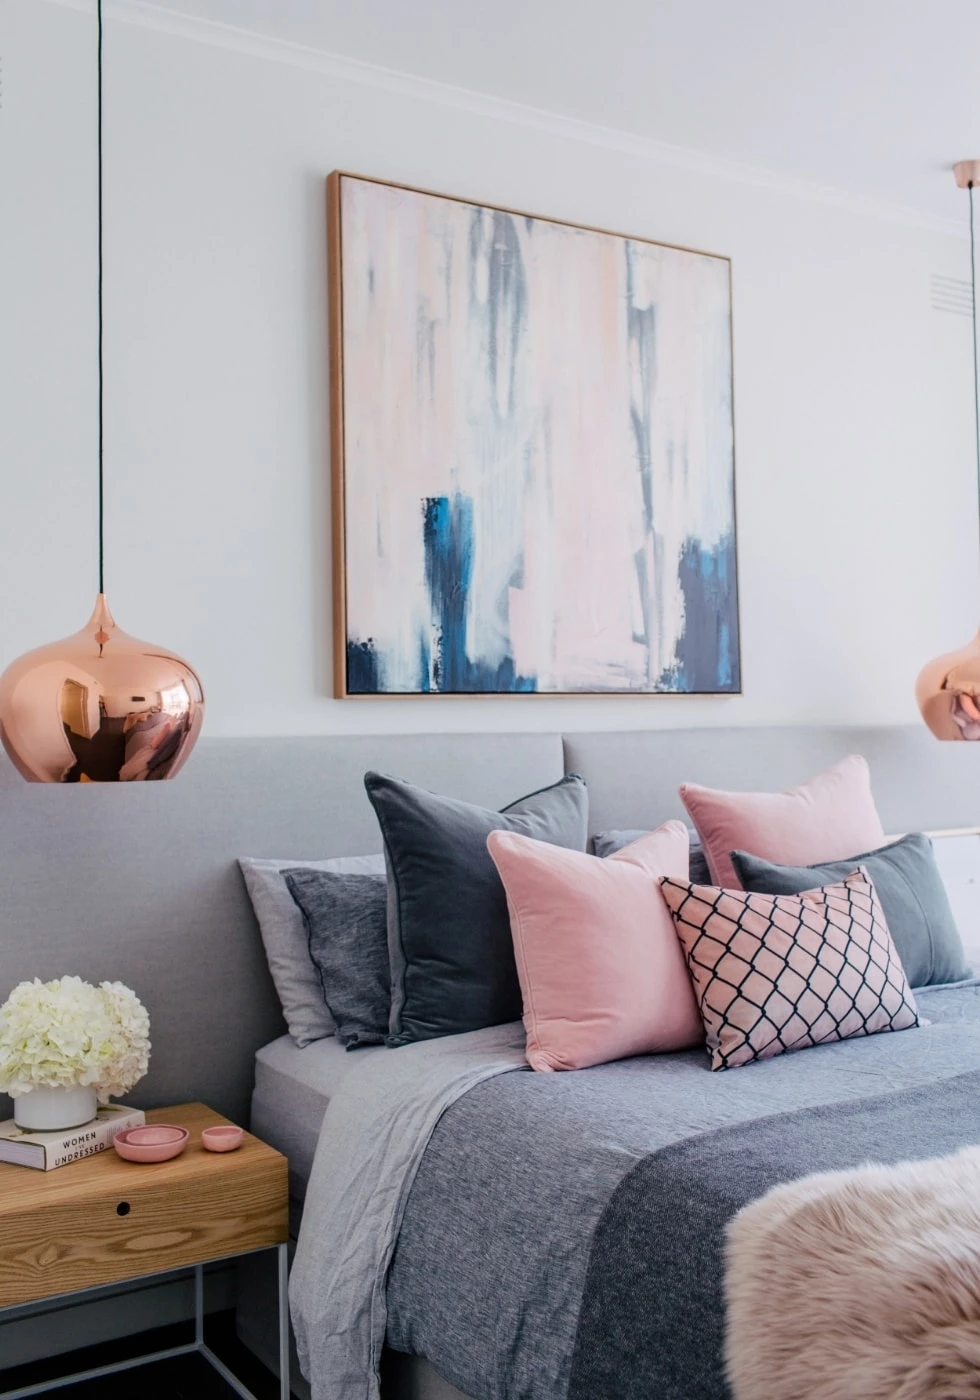 Snag This Look - Blush and Grey Bedroom